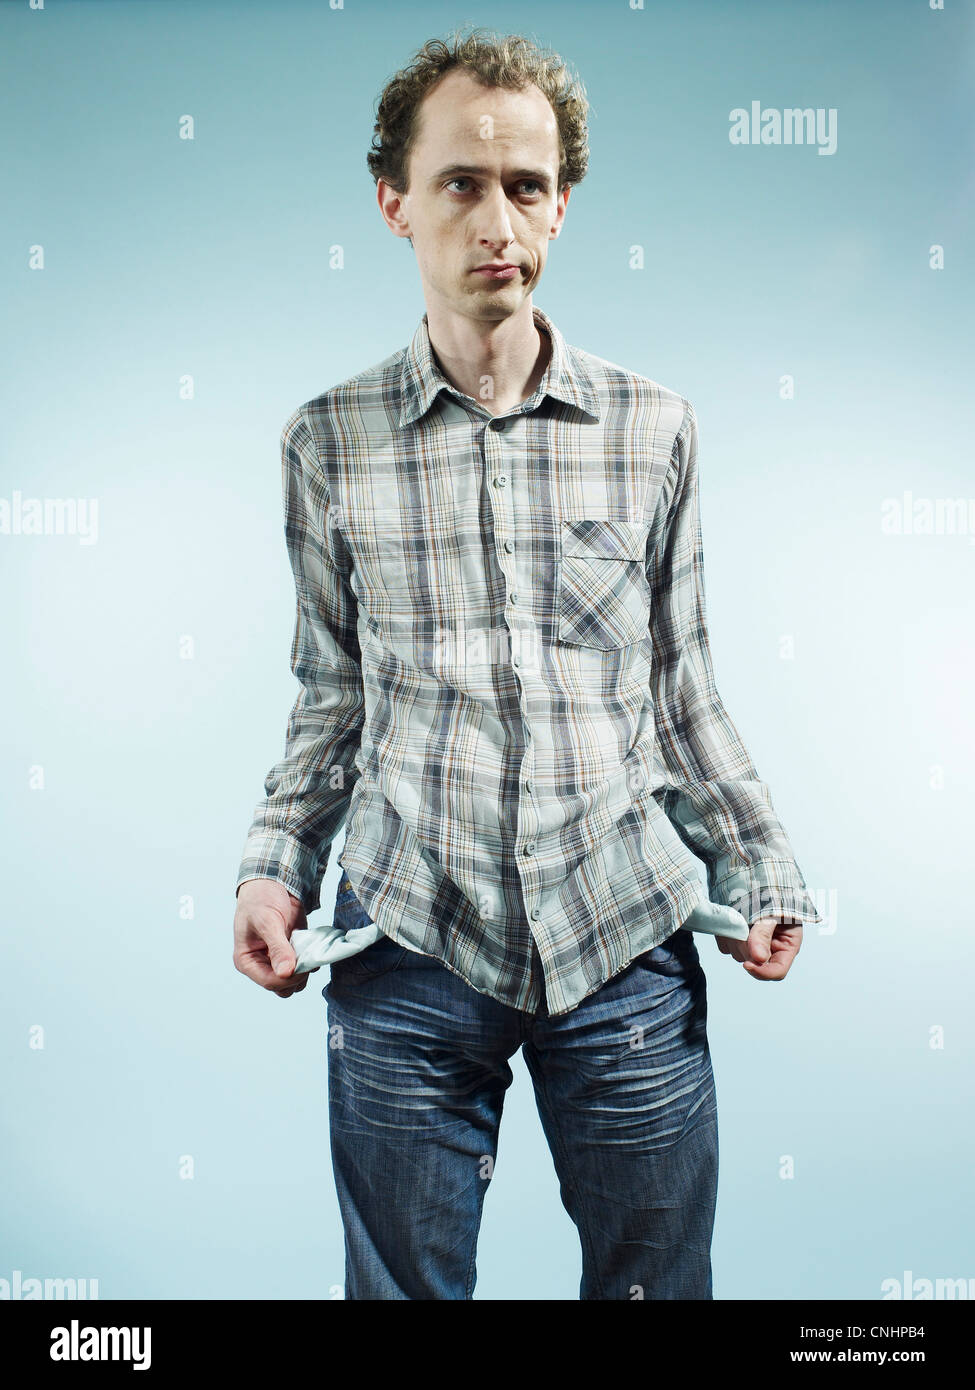 A man turns his pockets inside out to symbolize having no money Stock Photo